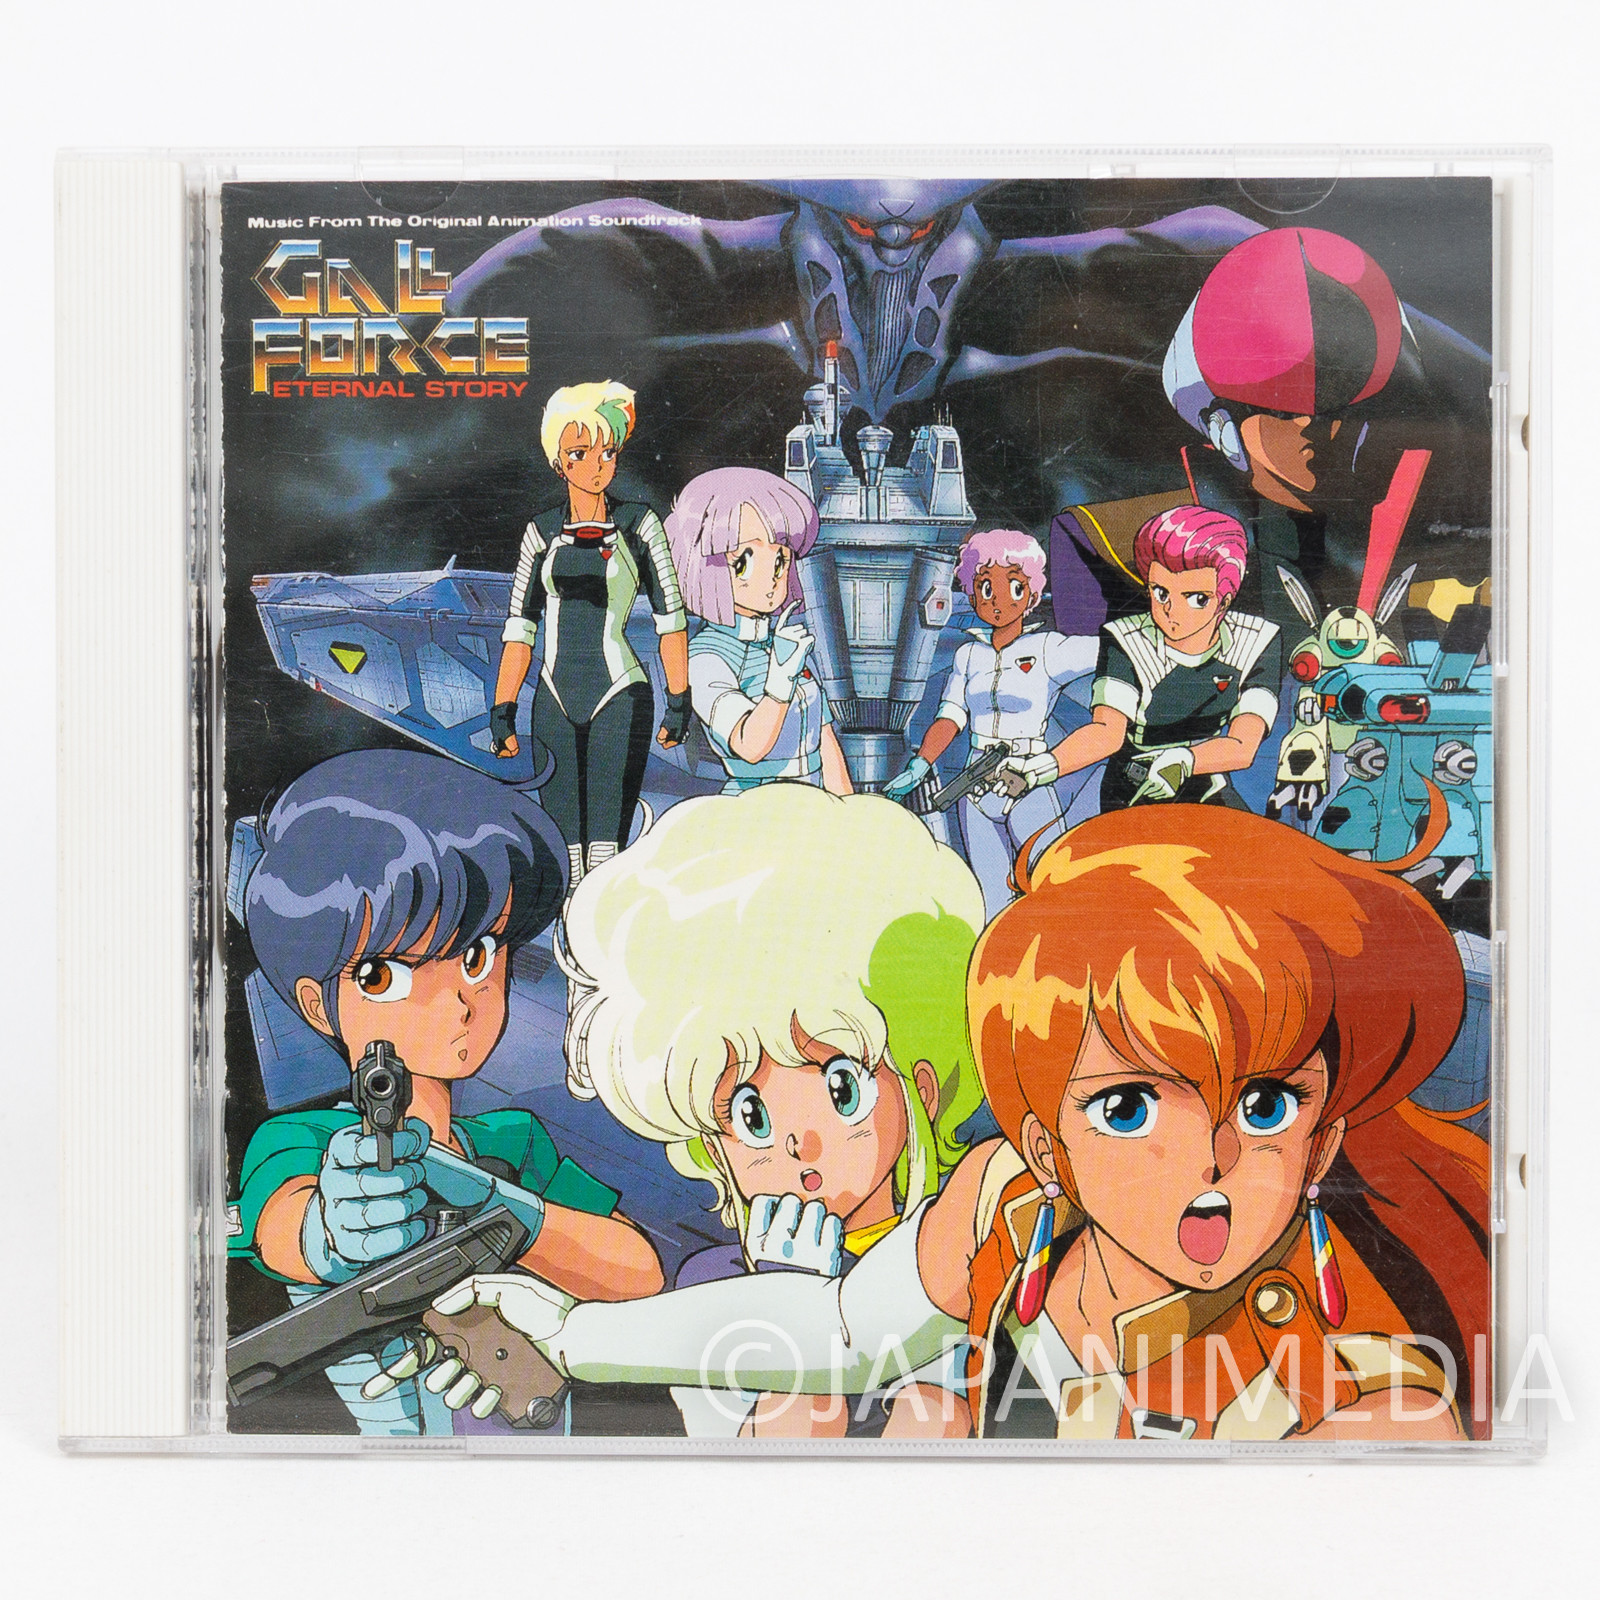 Gall Force Eternal Story Sound Track Music CD 32-8H-73 JAPAN